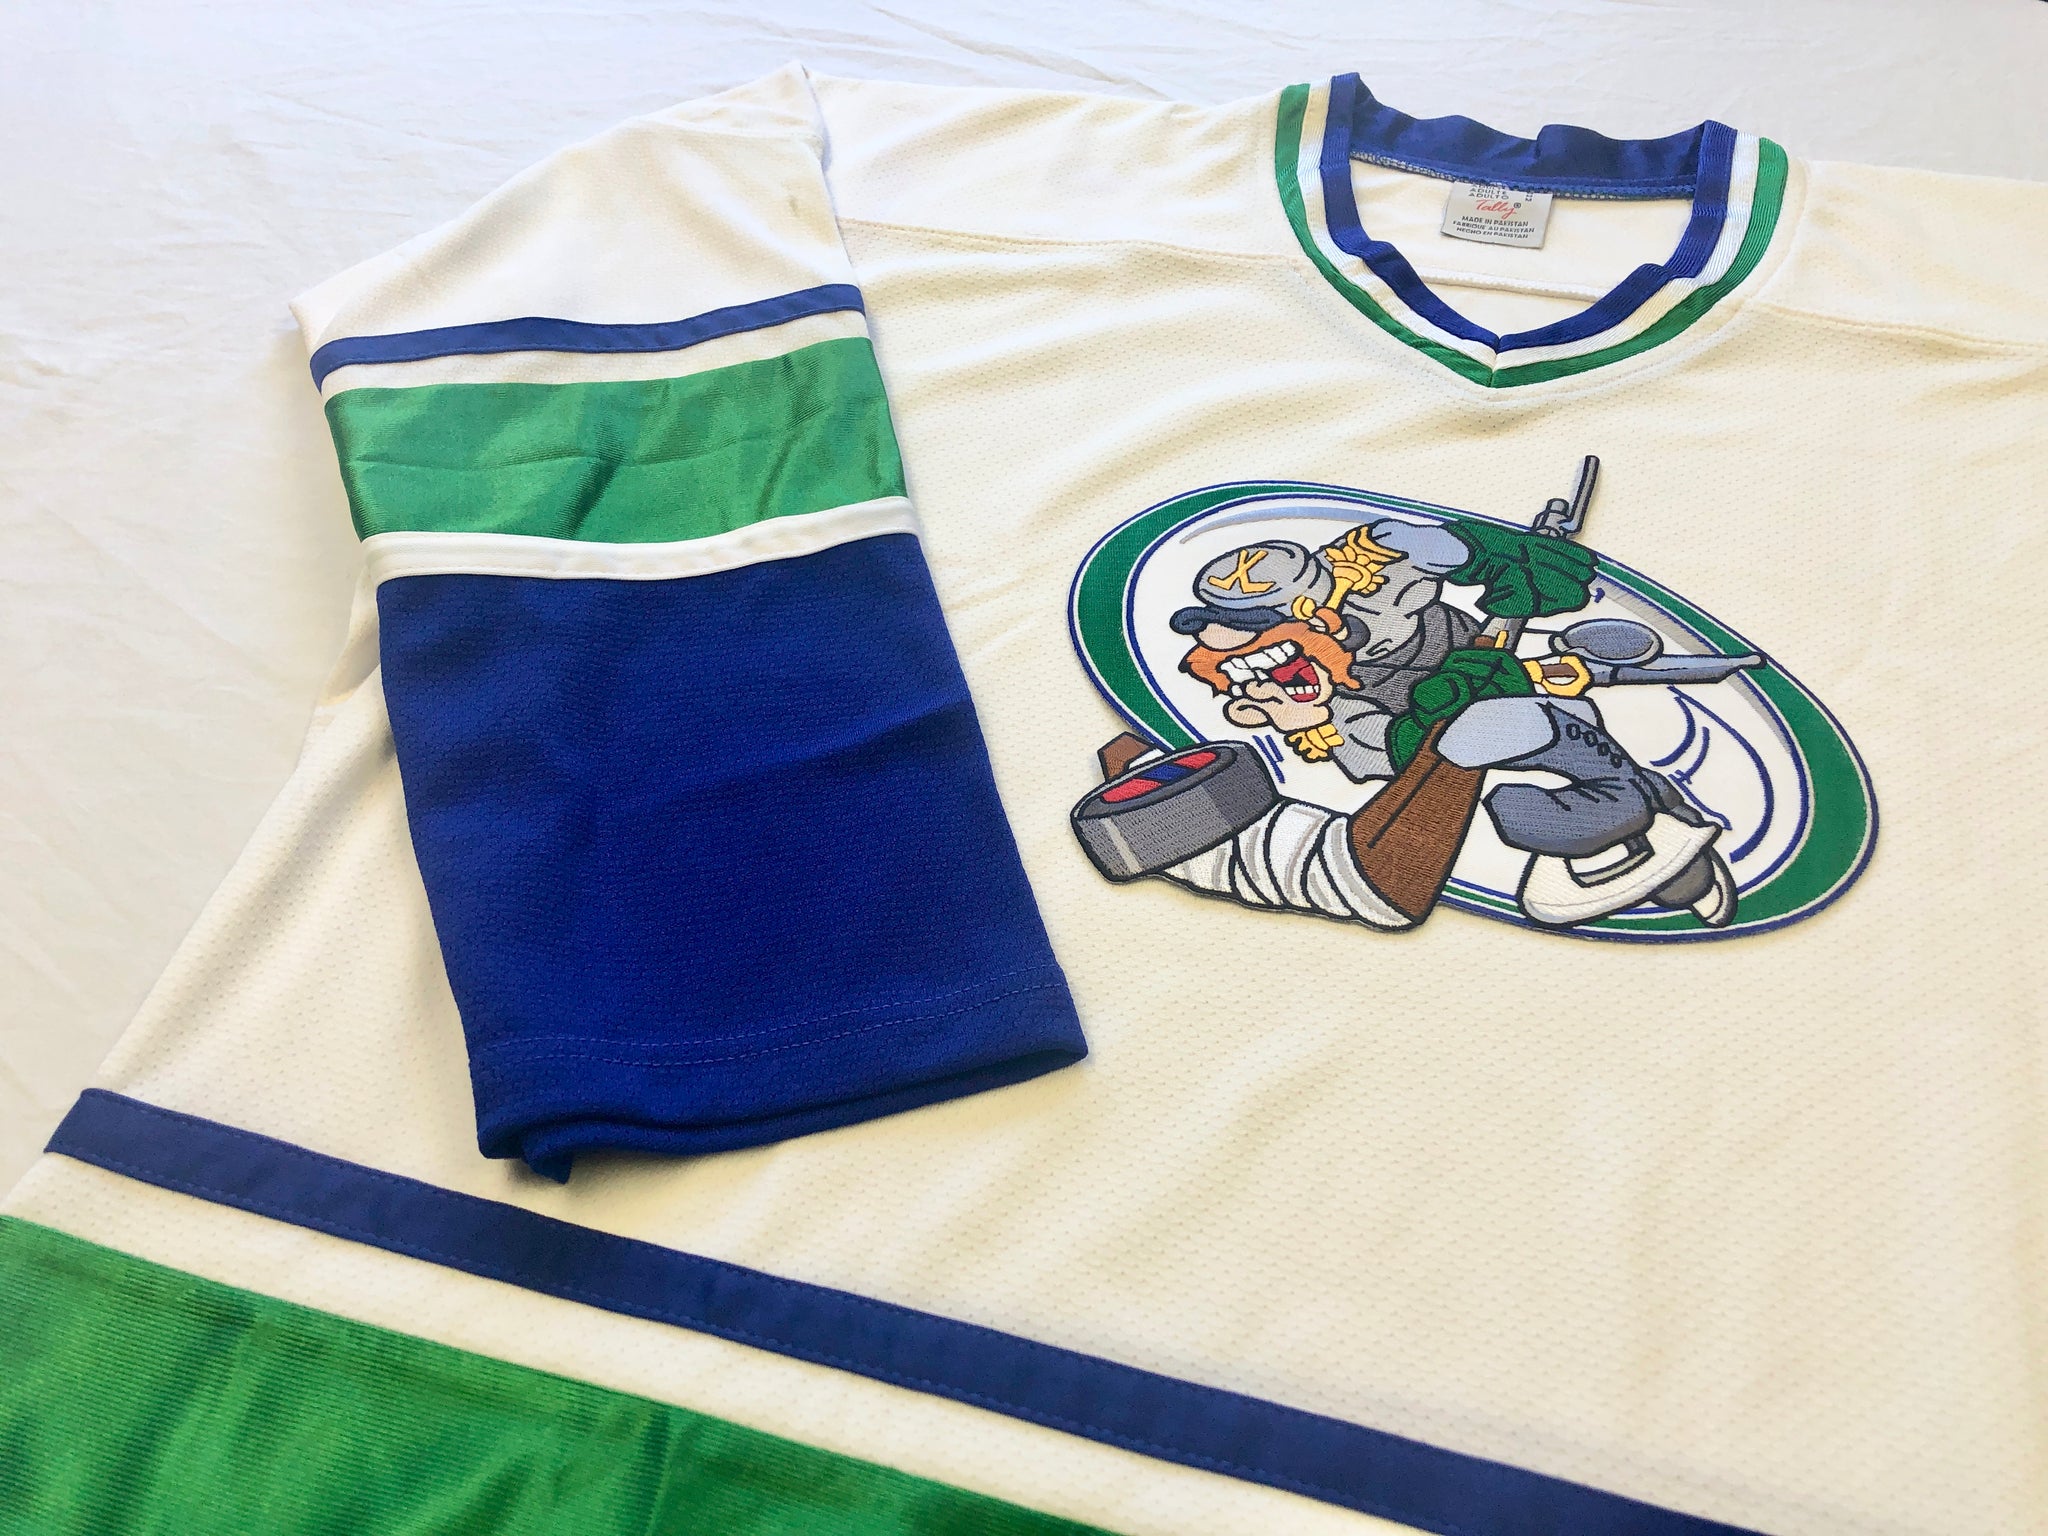  Generals Hockey Jerseys - We are Ready to Customize